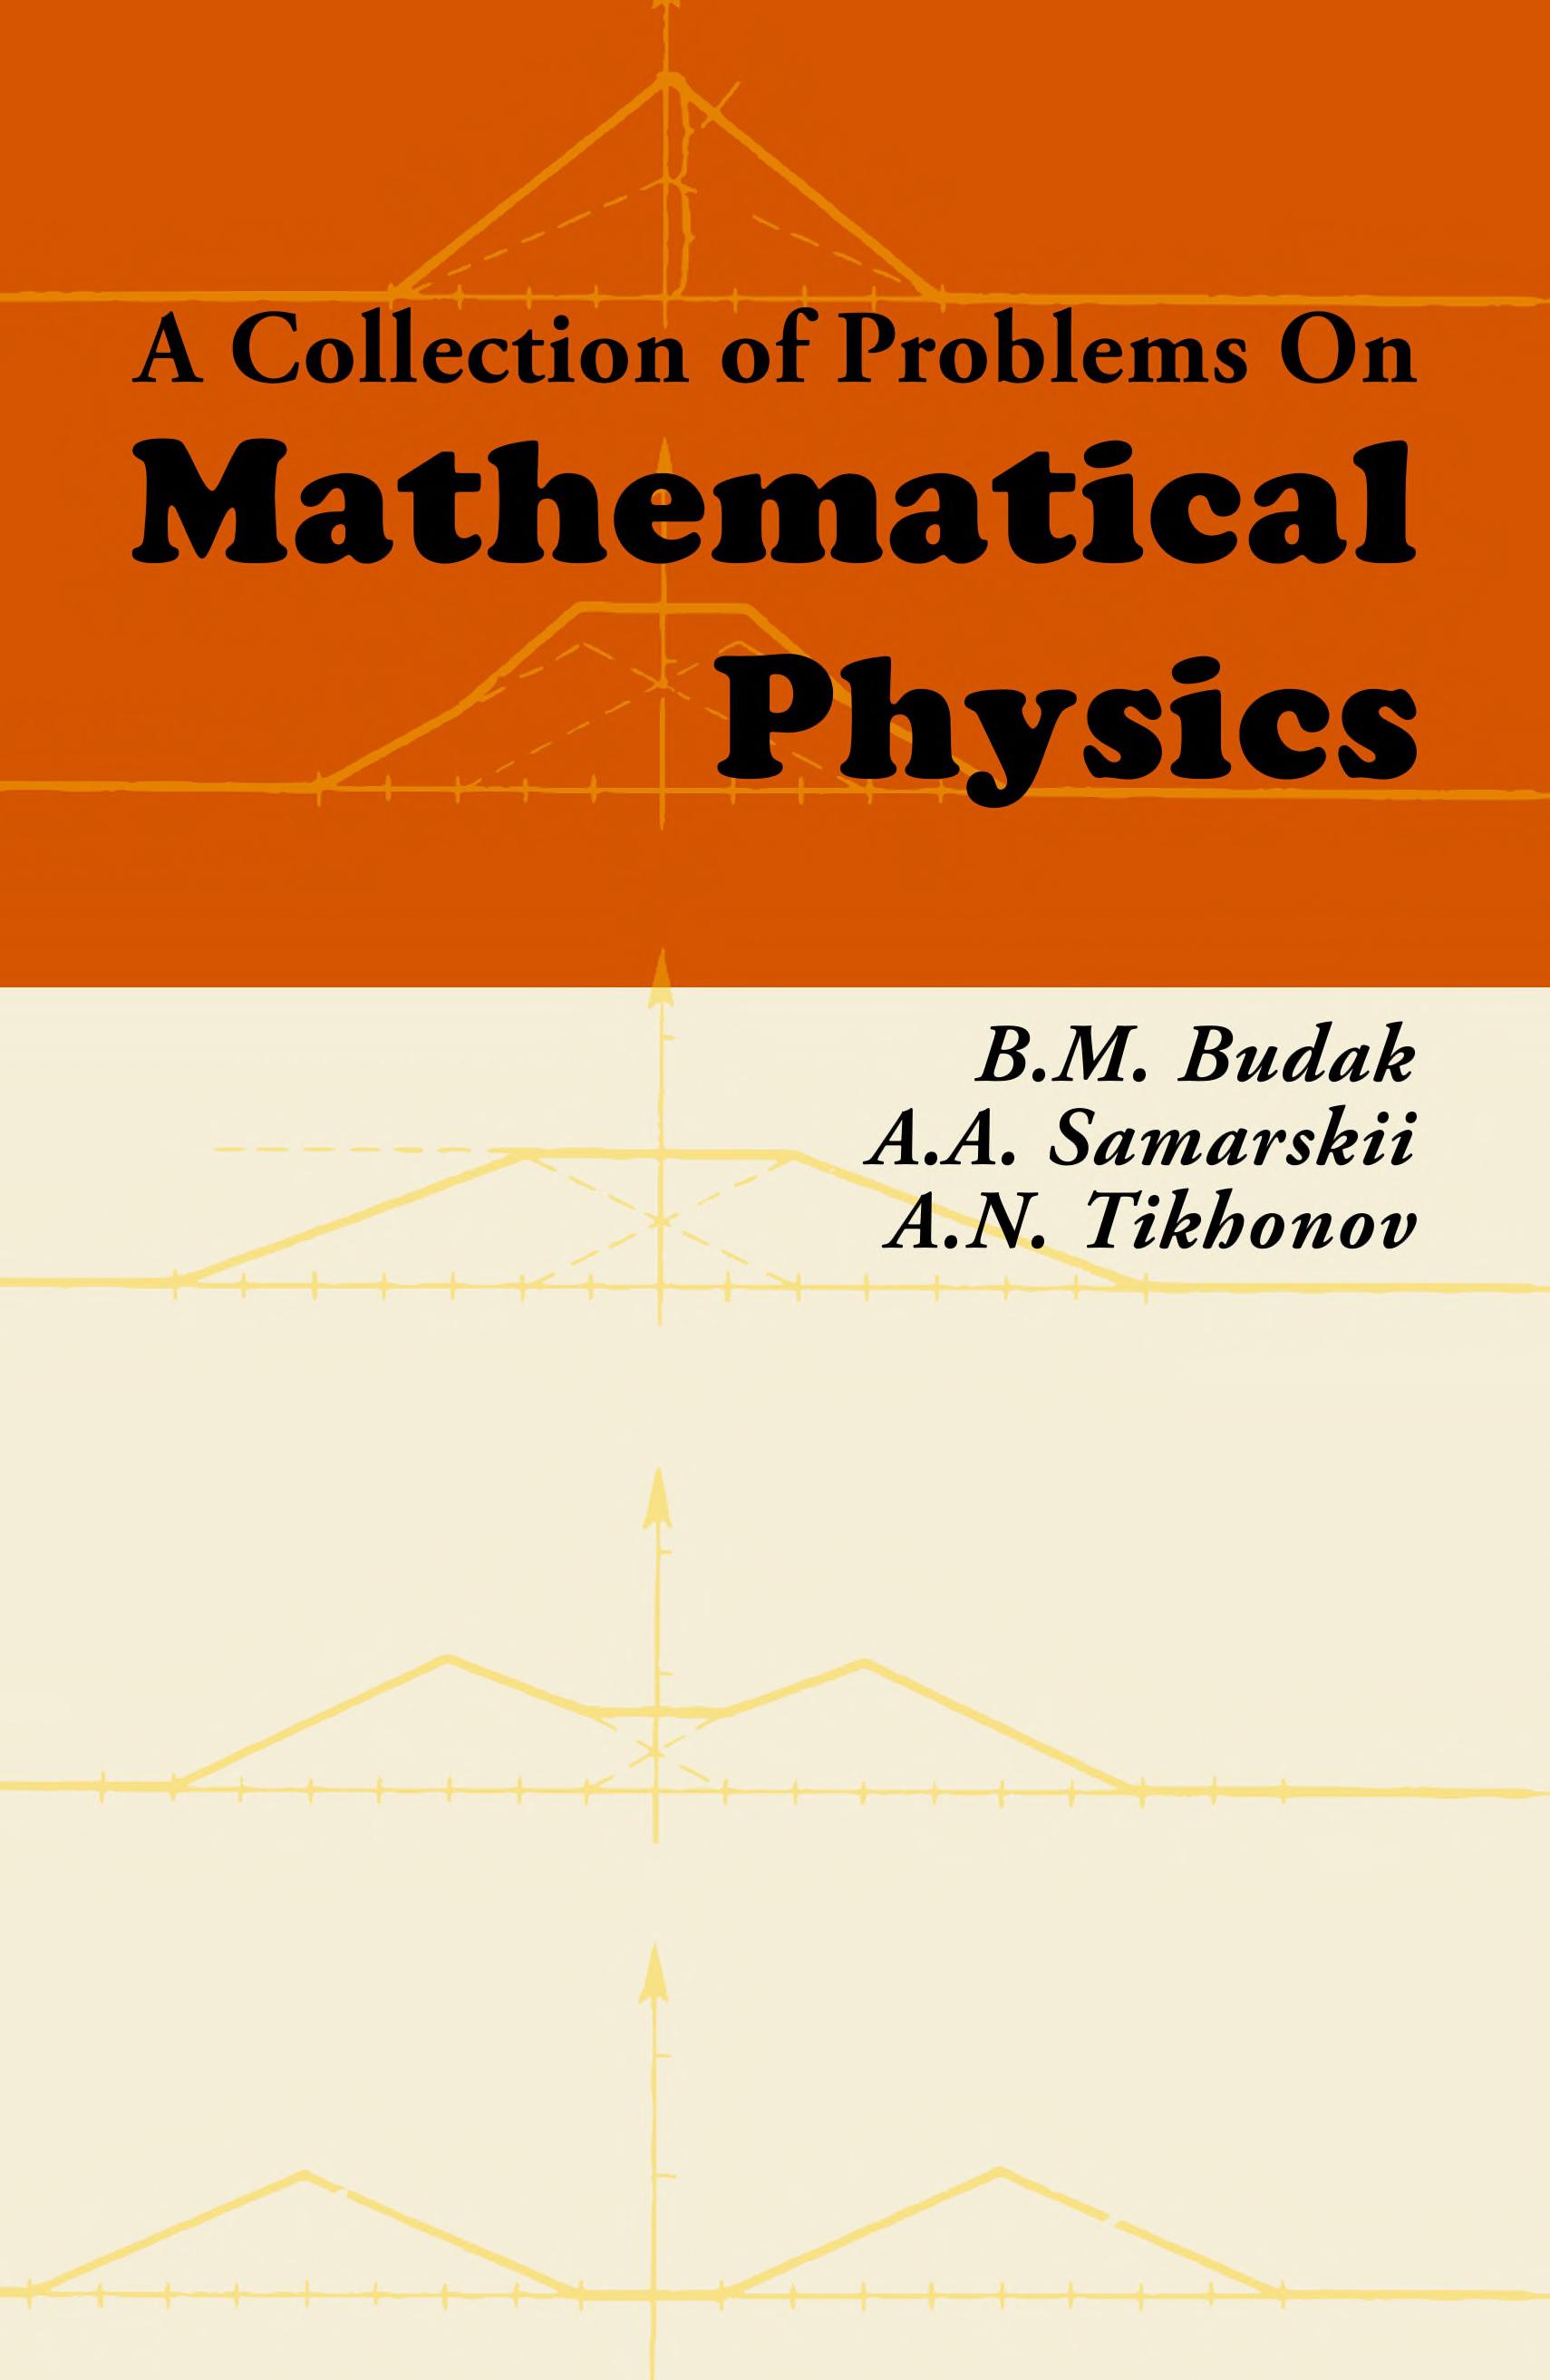 research articles on mathematical physics